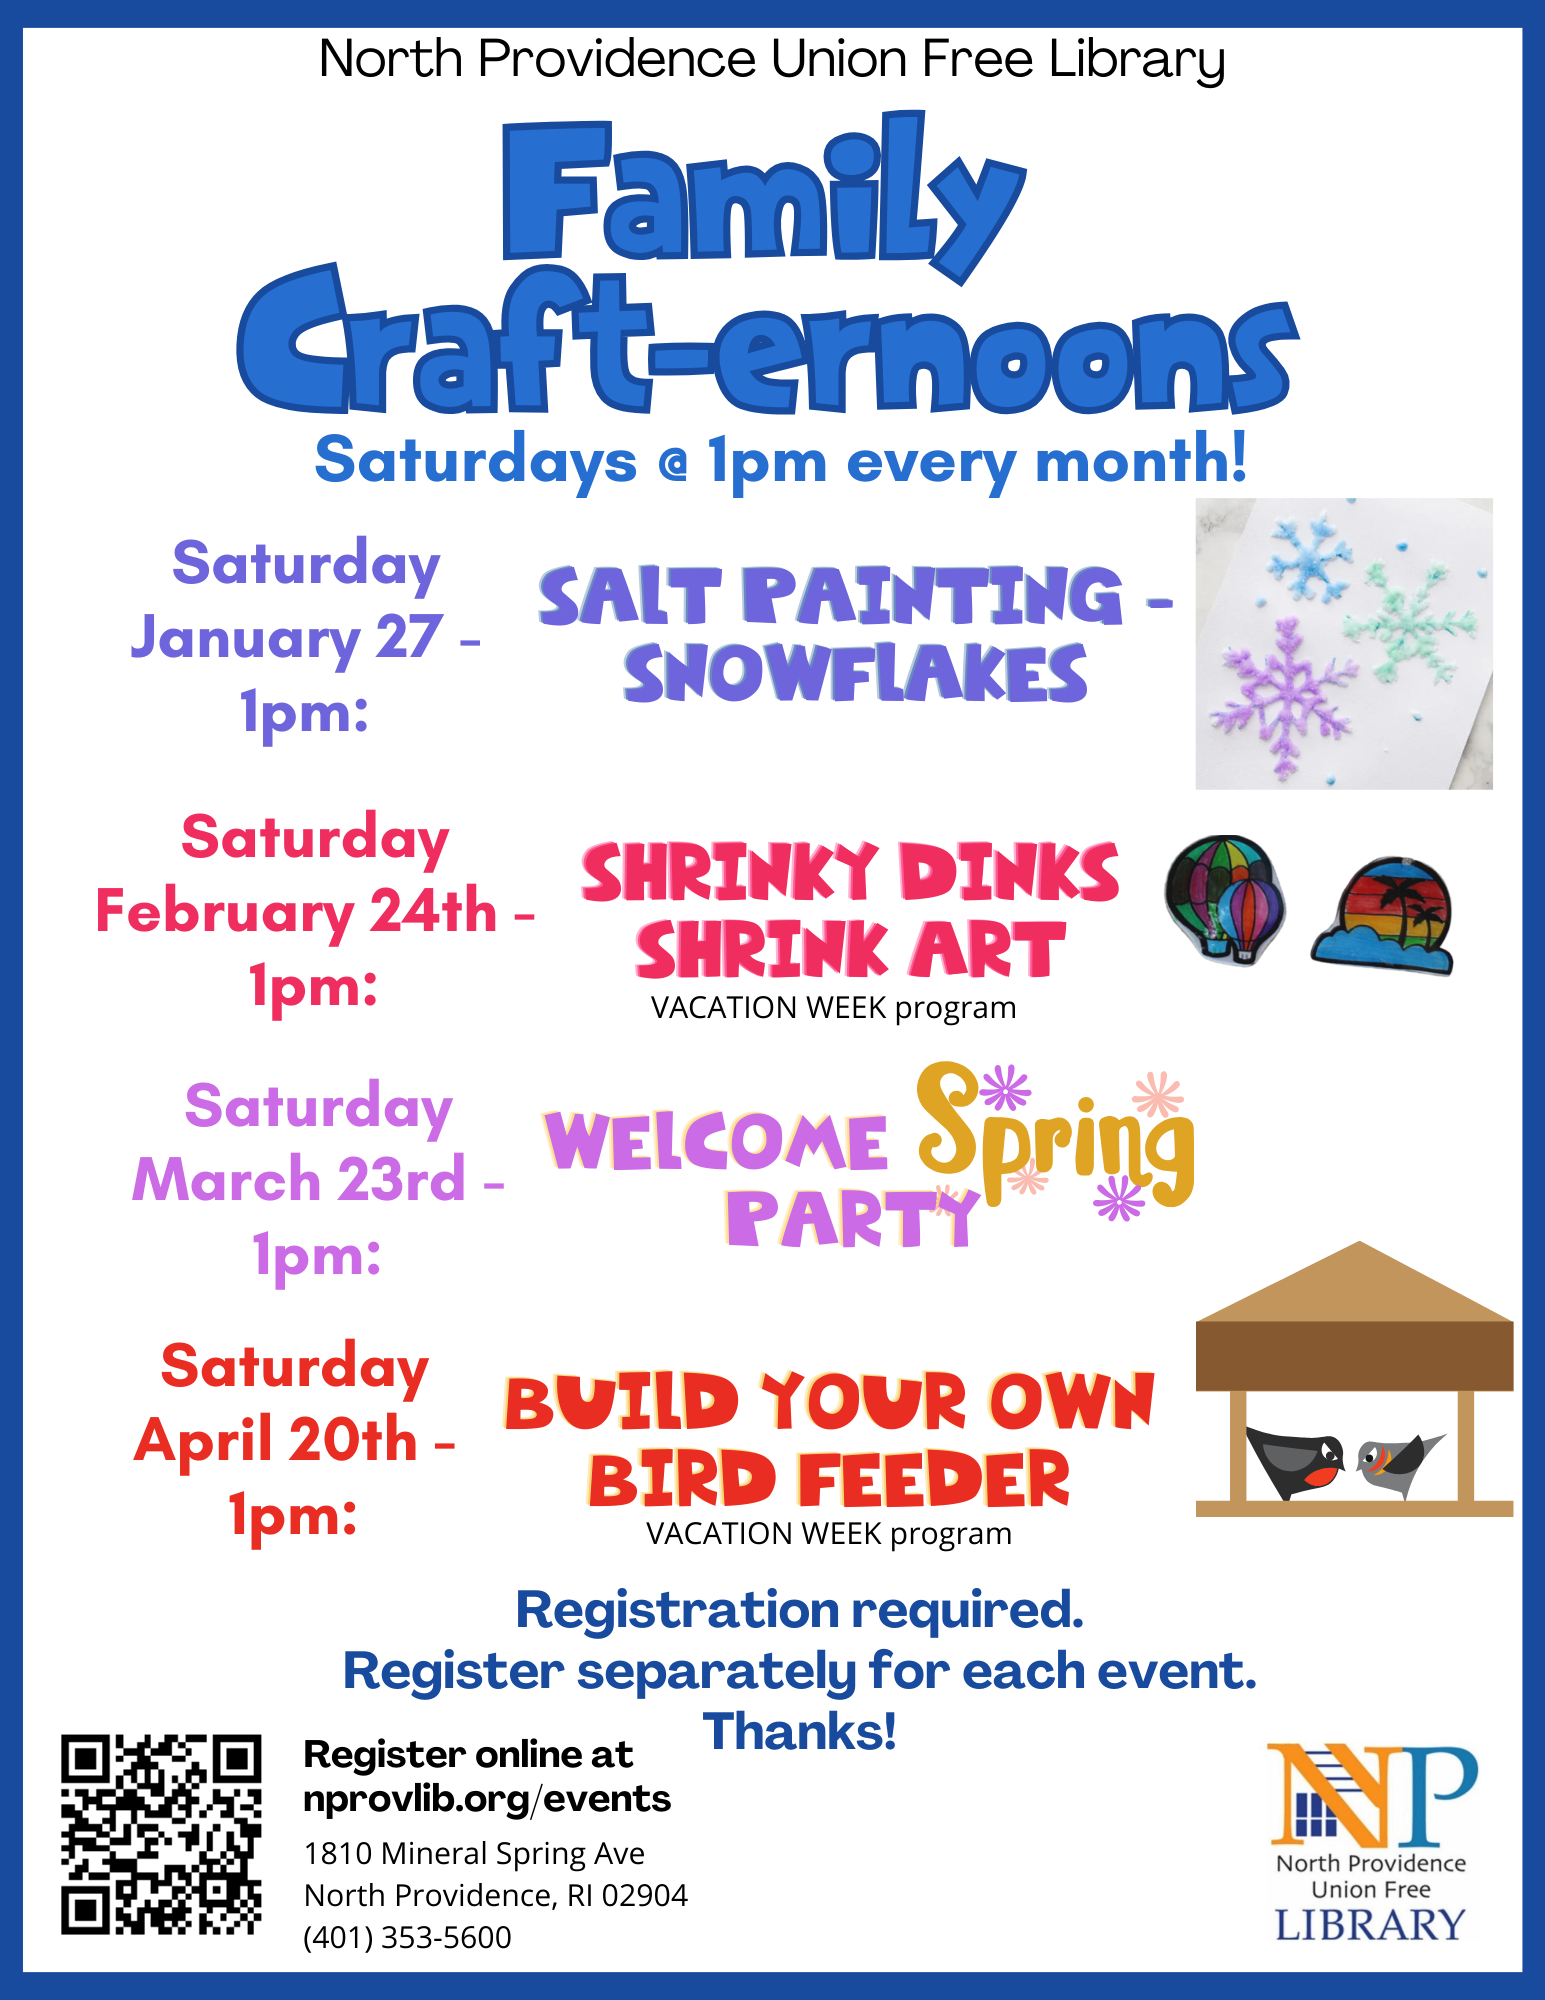 Flyer describing saturday afternoon programs-snowflake painting, shrinky dinks, welcome spring party and build your own bird feeder.